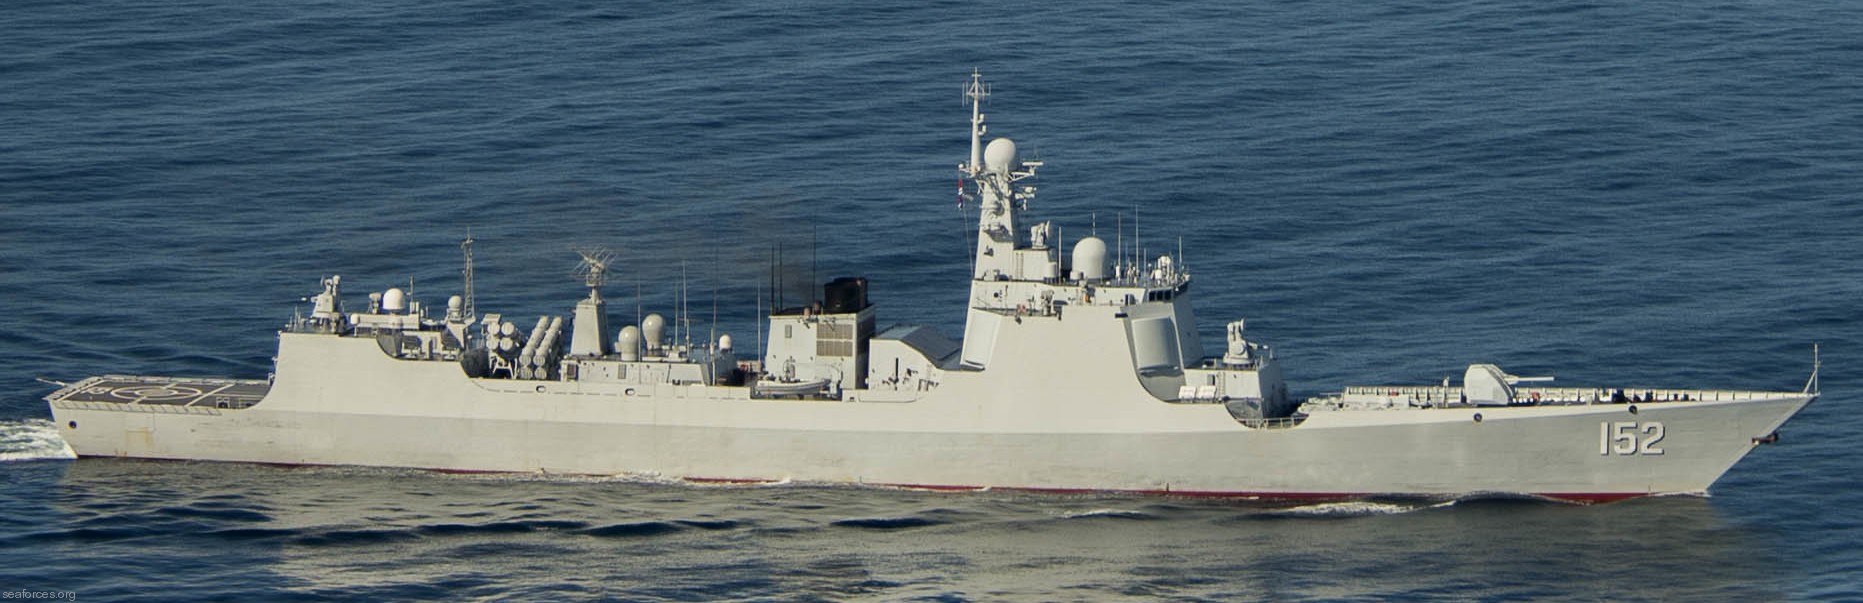 ddg-152 plans jinan type 052c class guided missile destroyer china people's liberation army navy 03